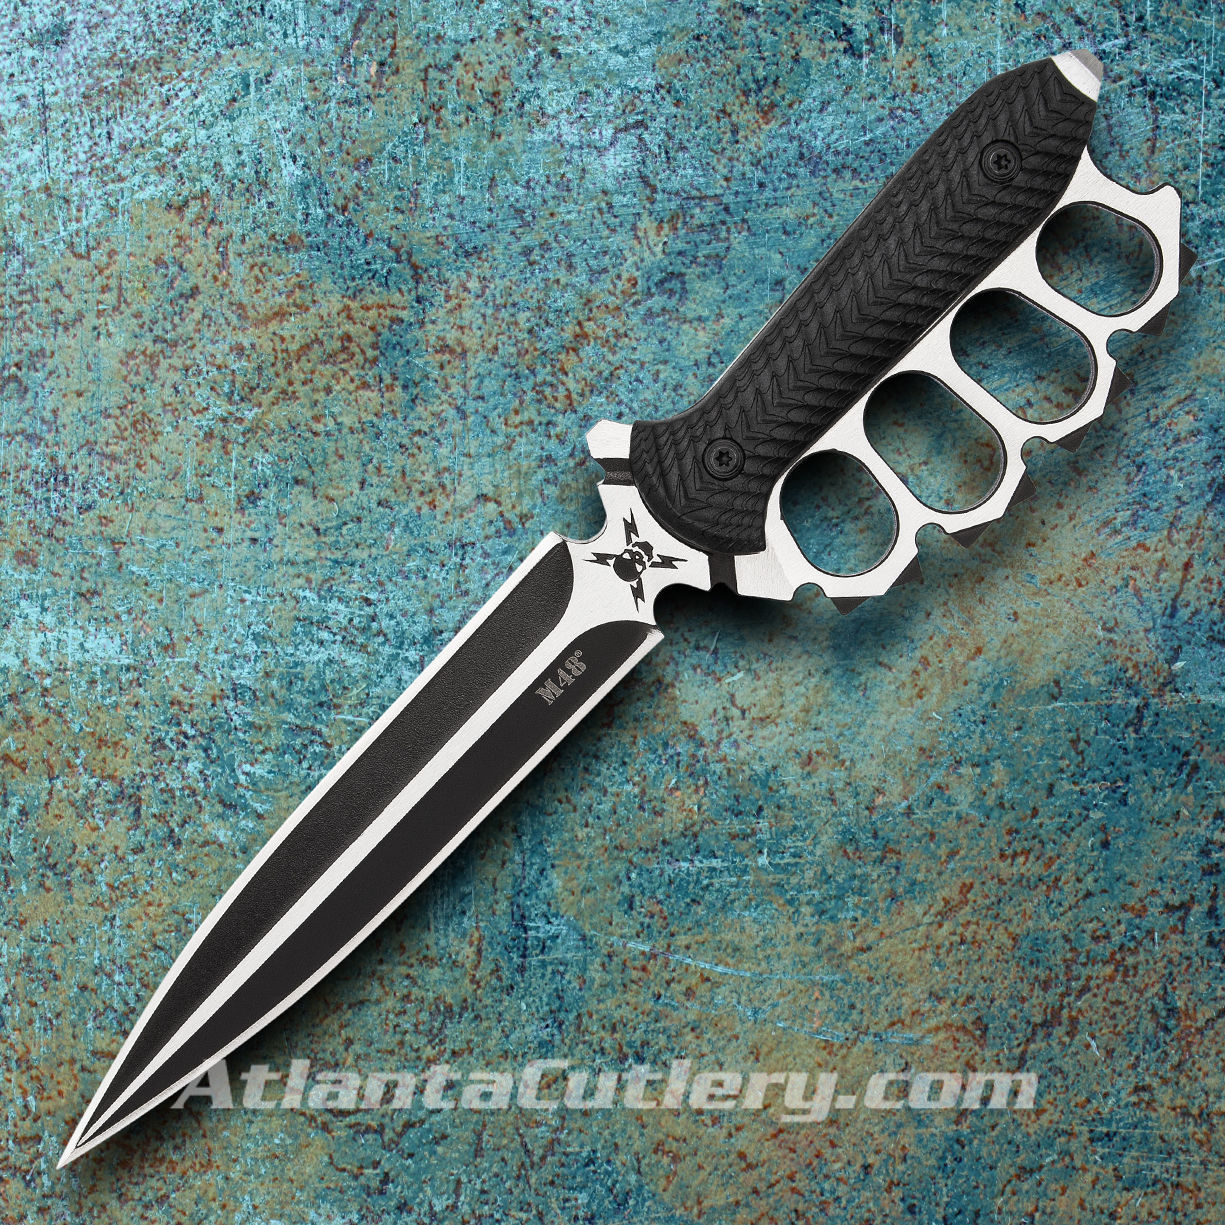 M48 Liberator Trench Knife with knuckle buster handle, sharp full tang blade and belt sheath with snap closure strap